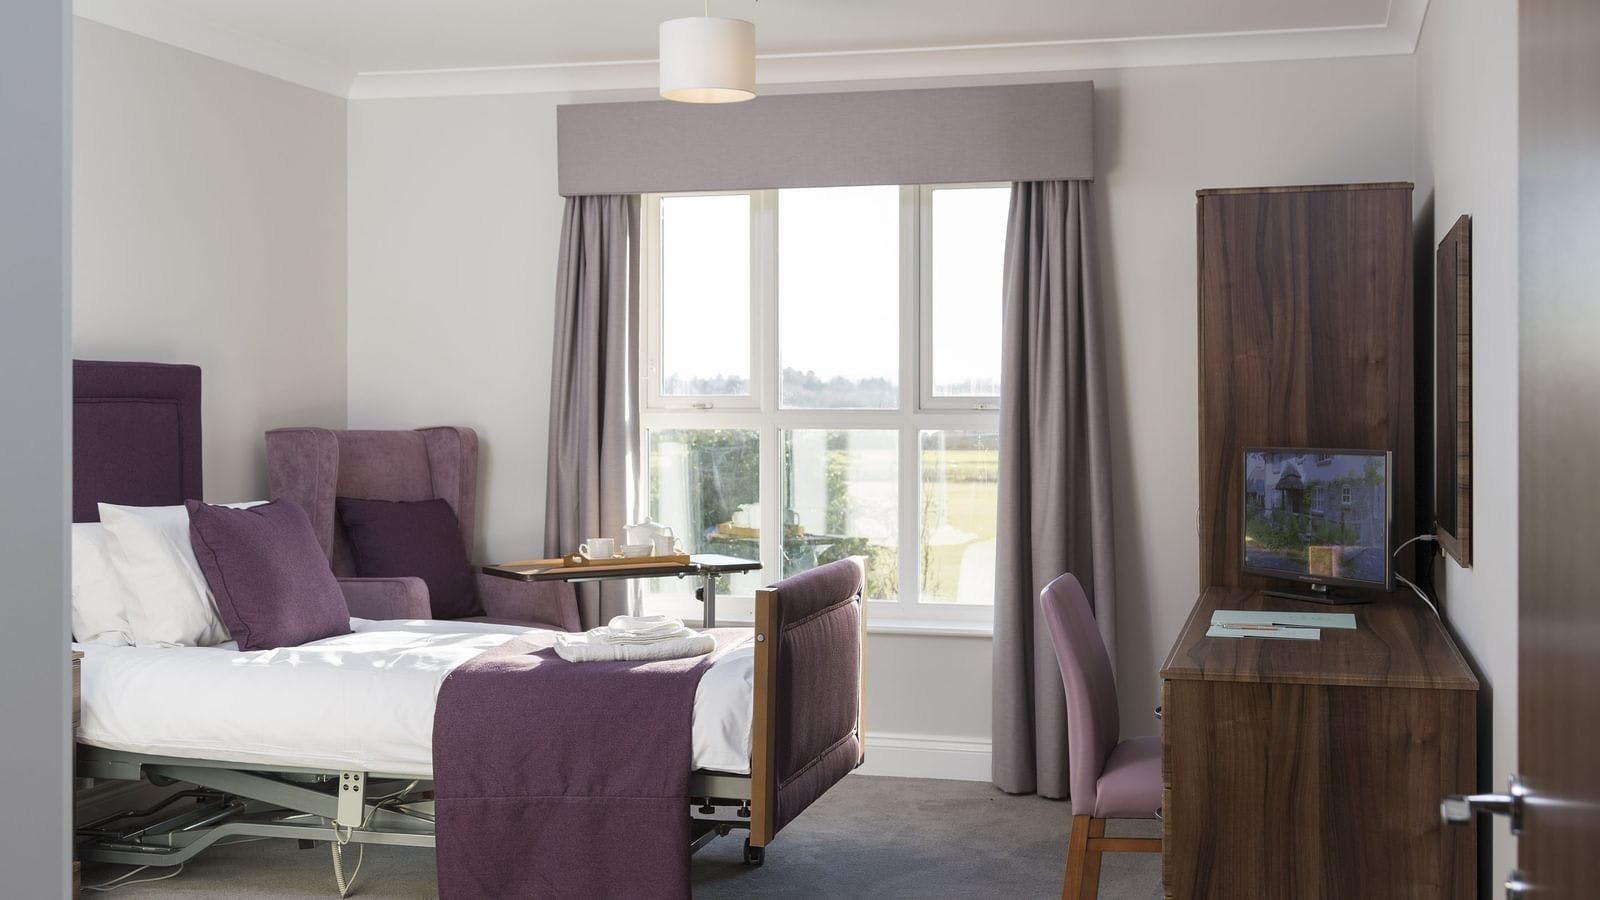 Bedroom at Blenheim Court Care Home in Liss, East Hampshire